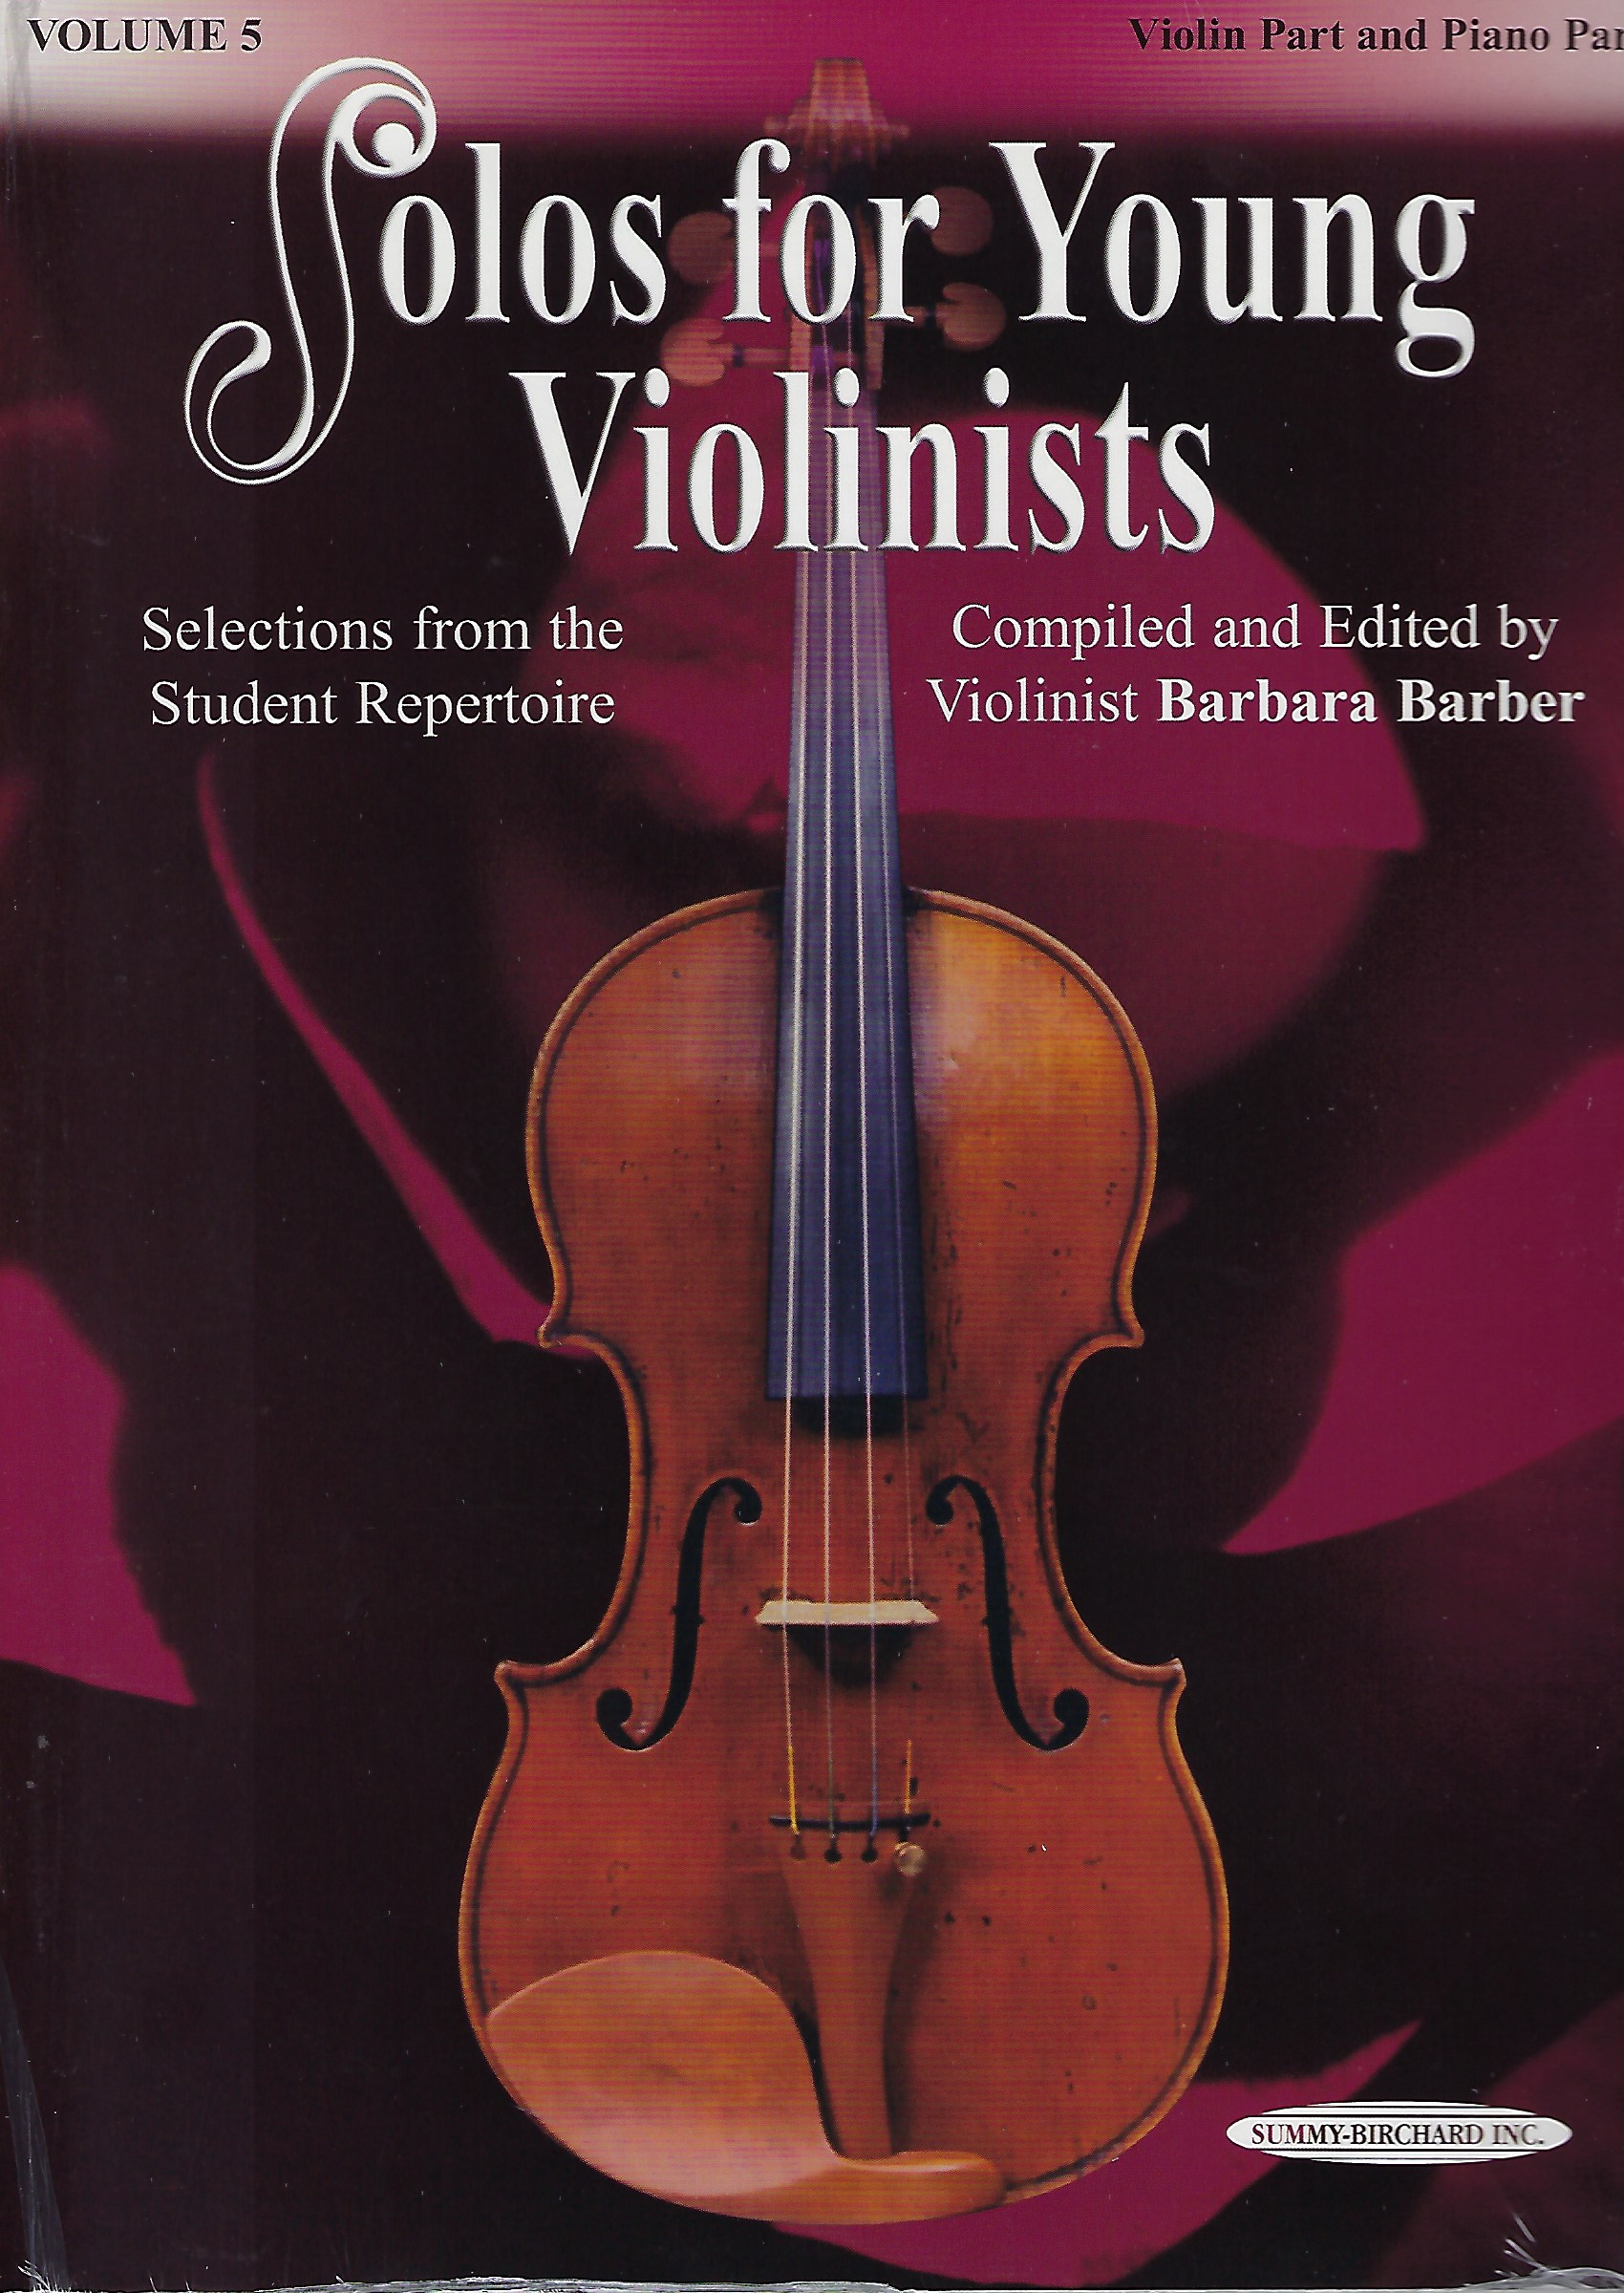 Solos for Young Violinists vol. 5